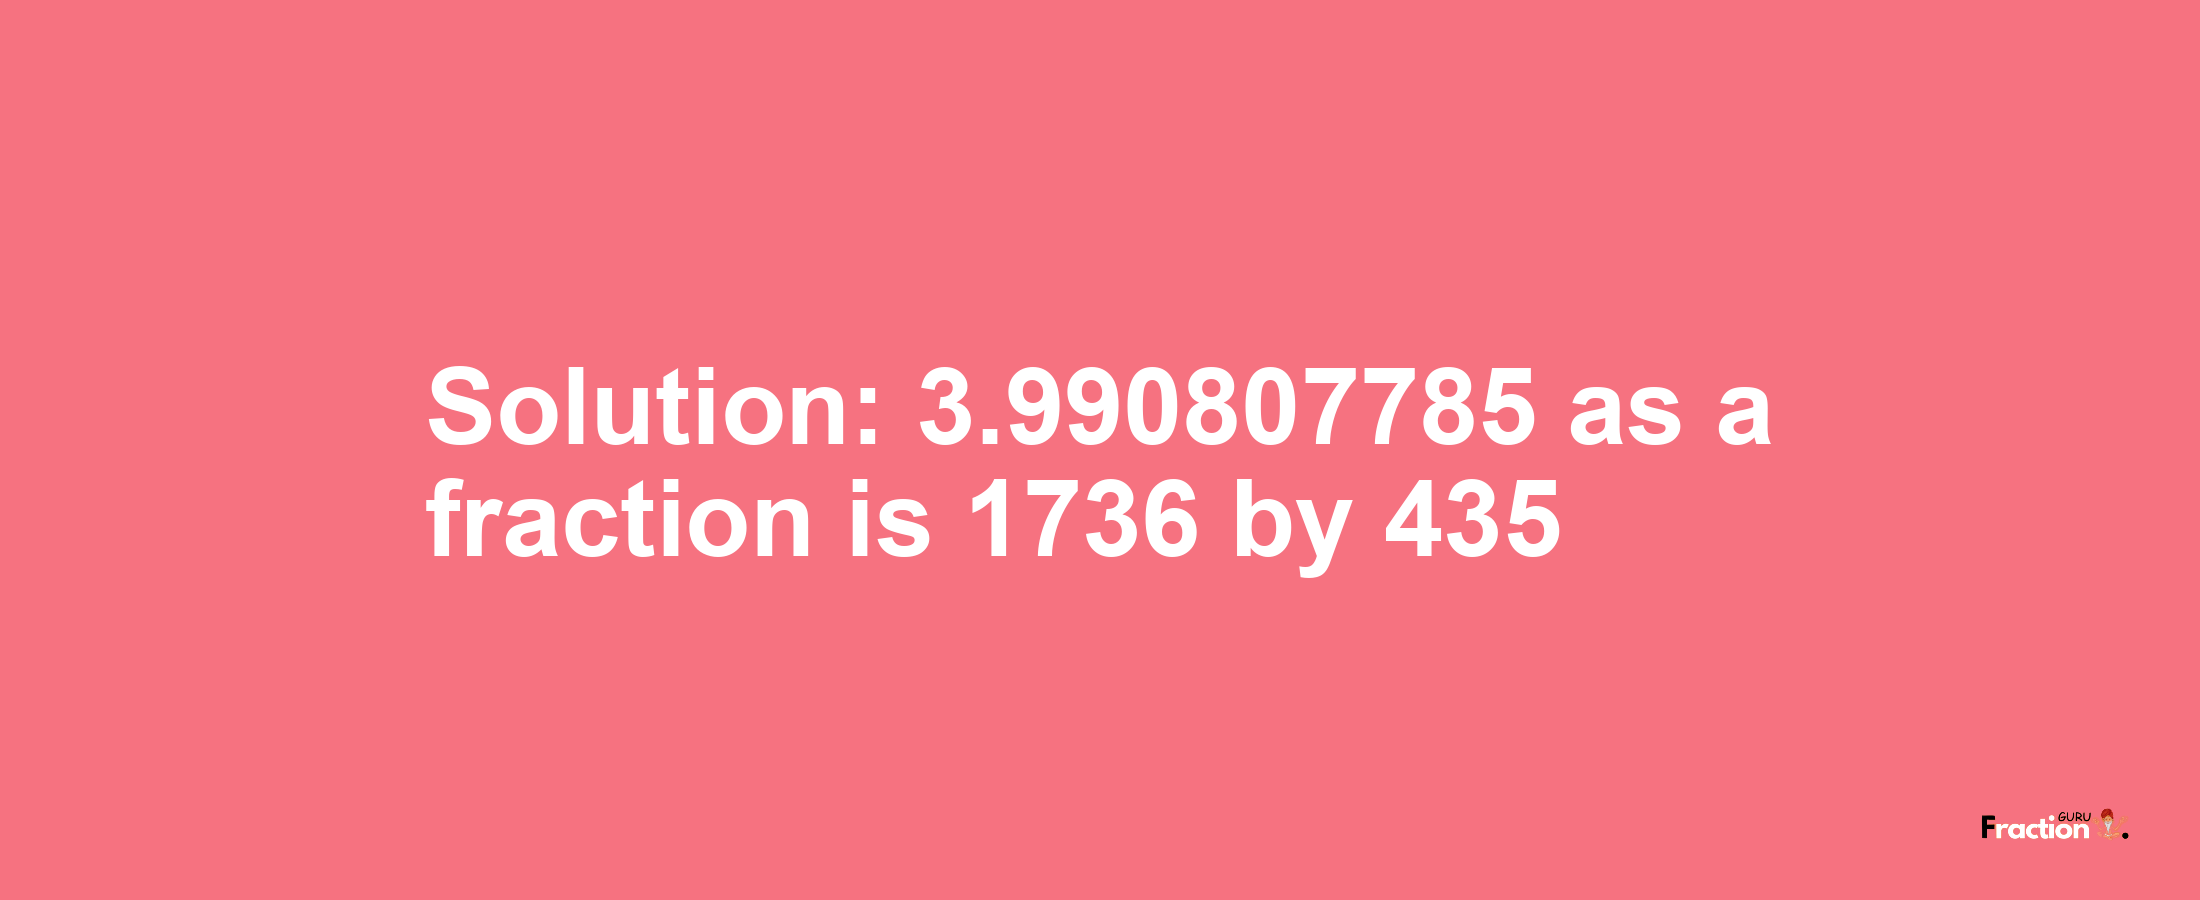 Solution:3.990807785 as a fraction is 1736/435